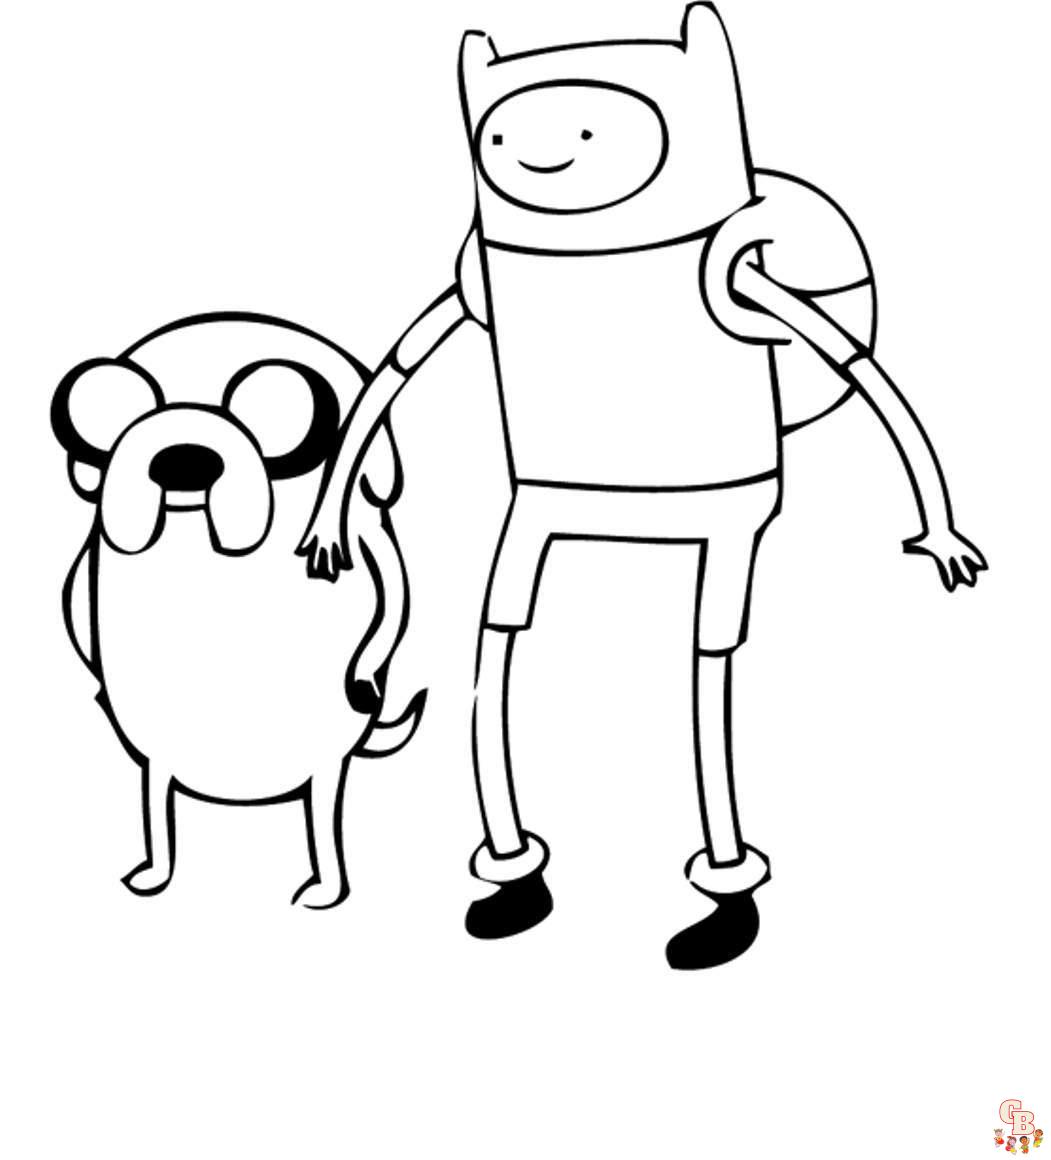 Finn and Jake Coloring Pages 4